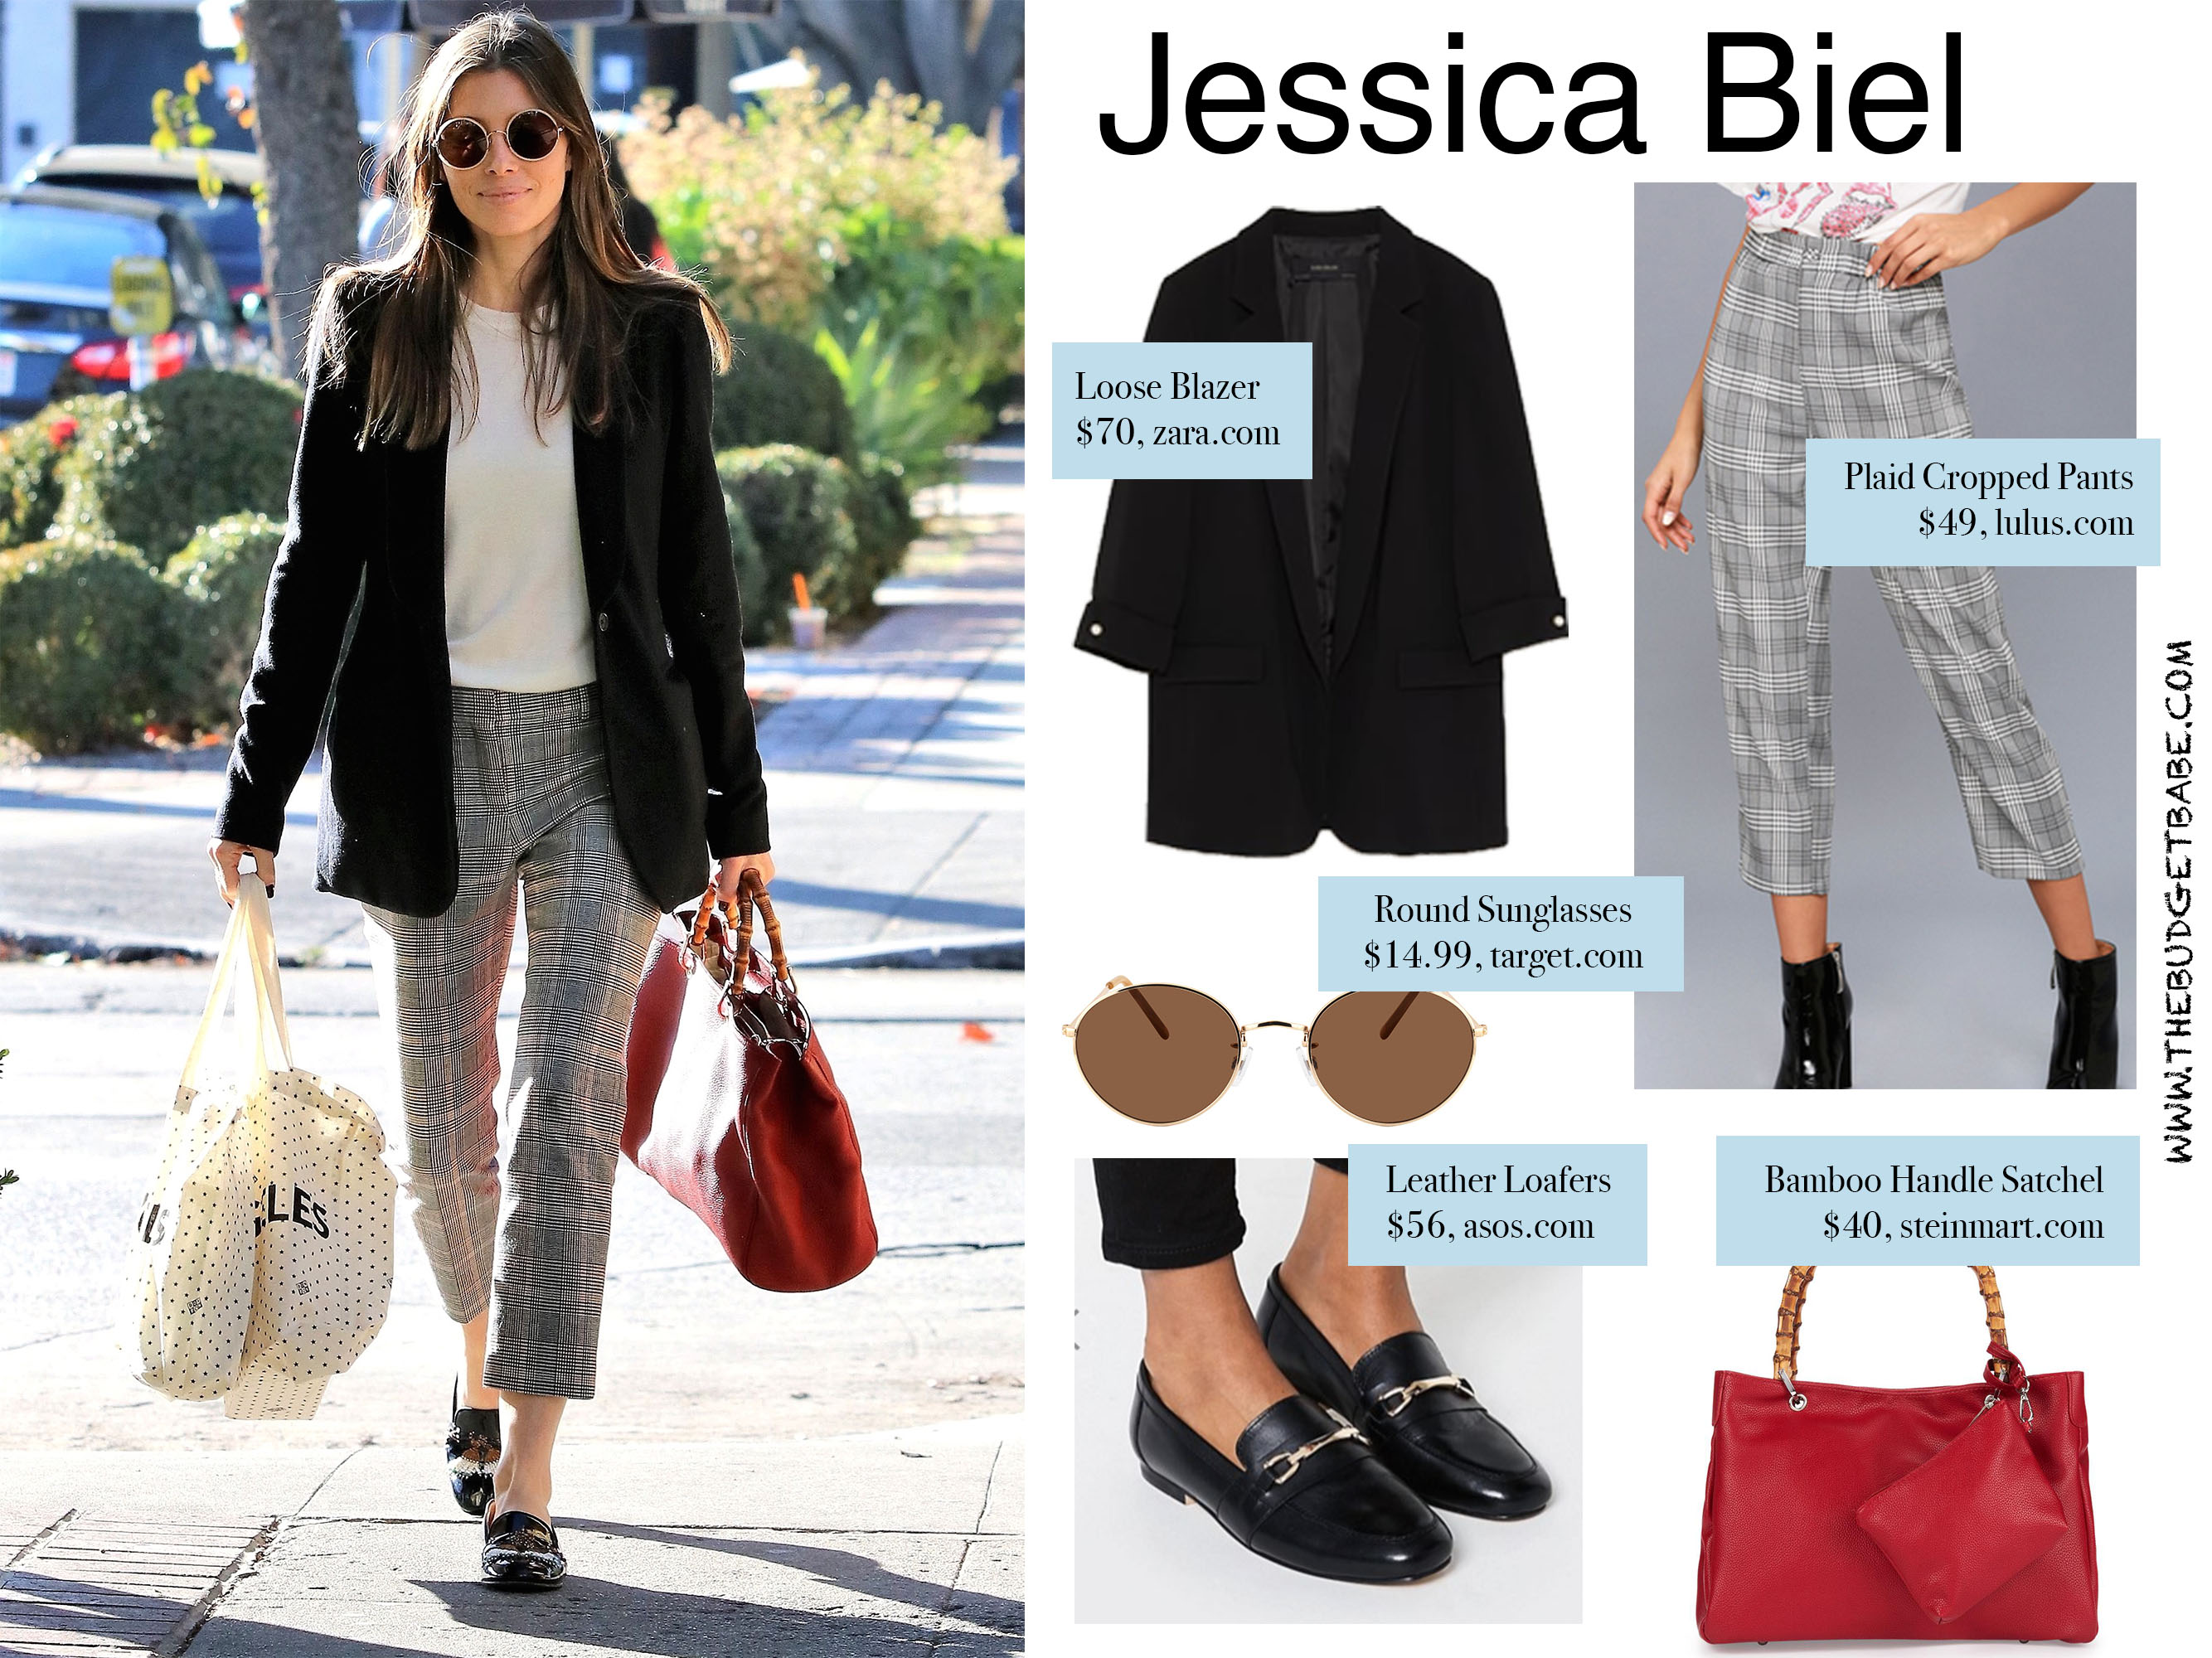 Jessica Biel's plaid check pants, blazer and loafers look for less